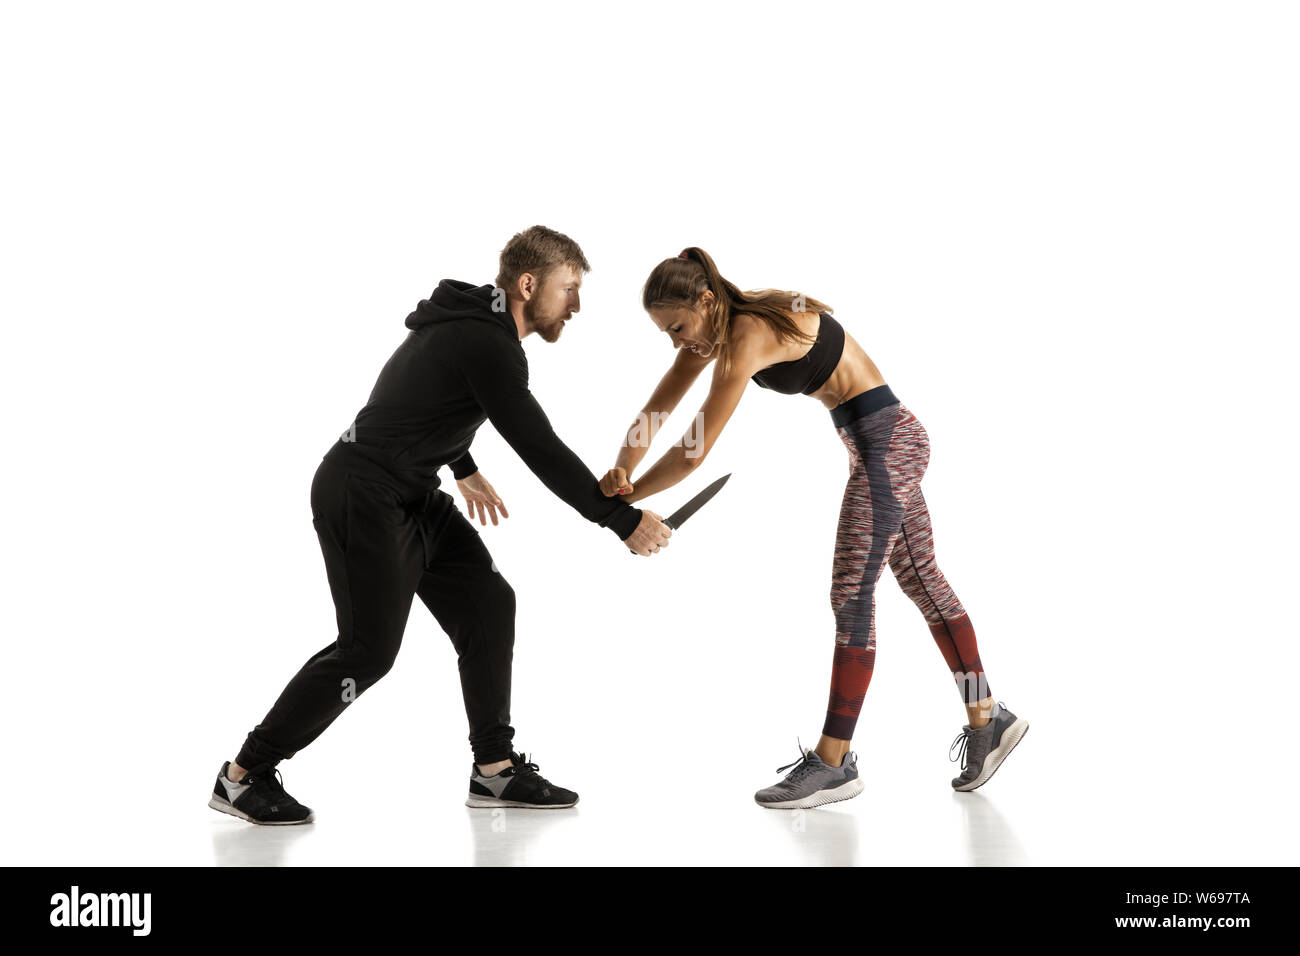 Man in black outfit and athletic caucasian woman fighting on white studio background. Women's self-defense, rights, equality concept. Confronting domestic violence or robbery on the street. Stock Photo